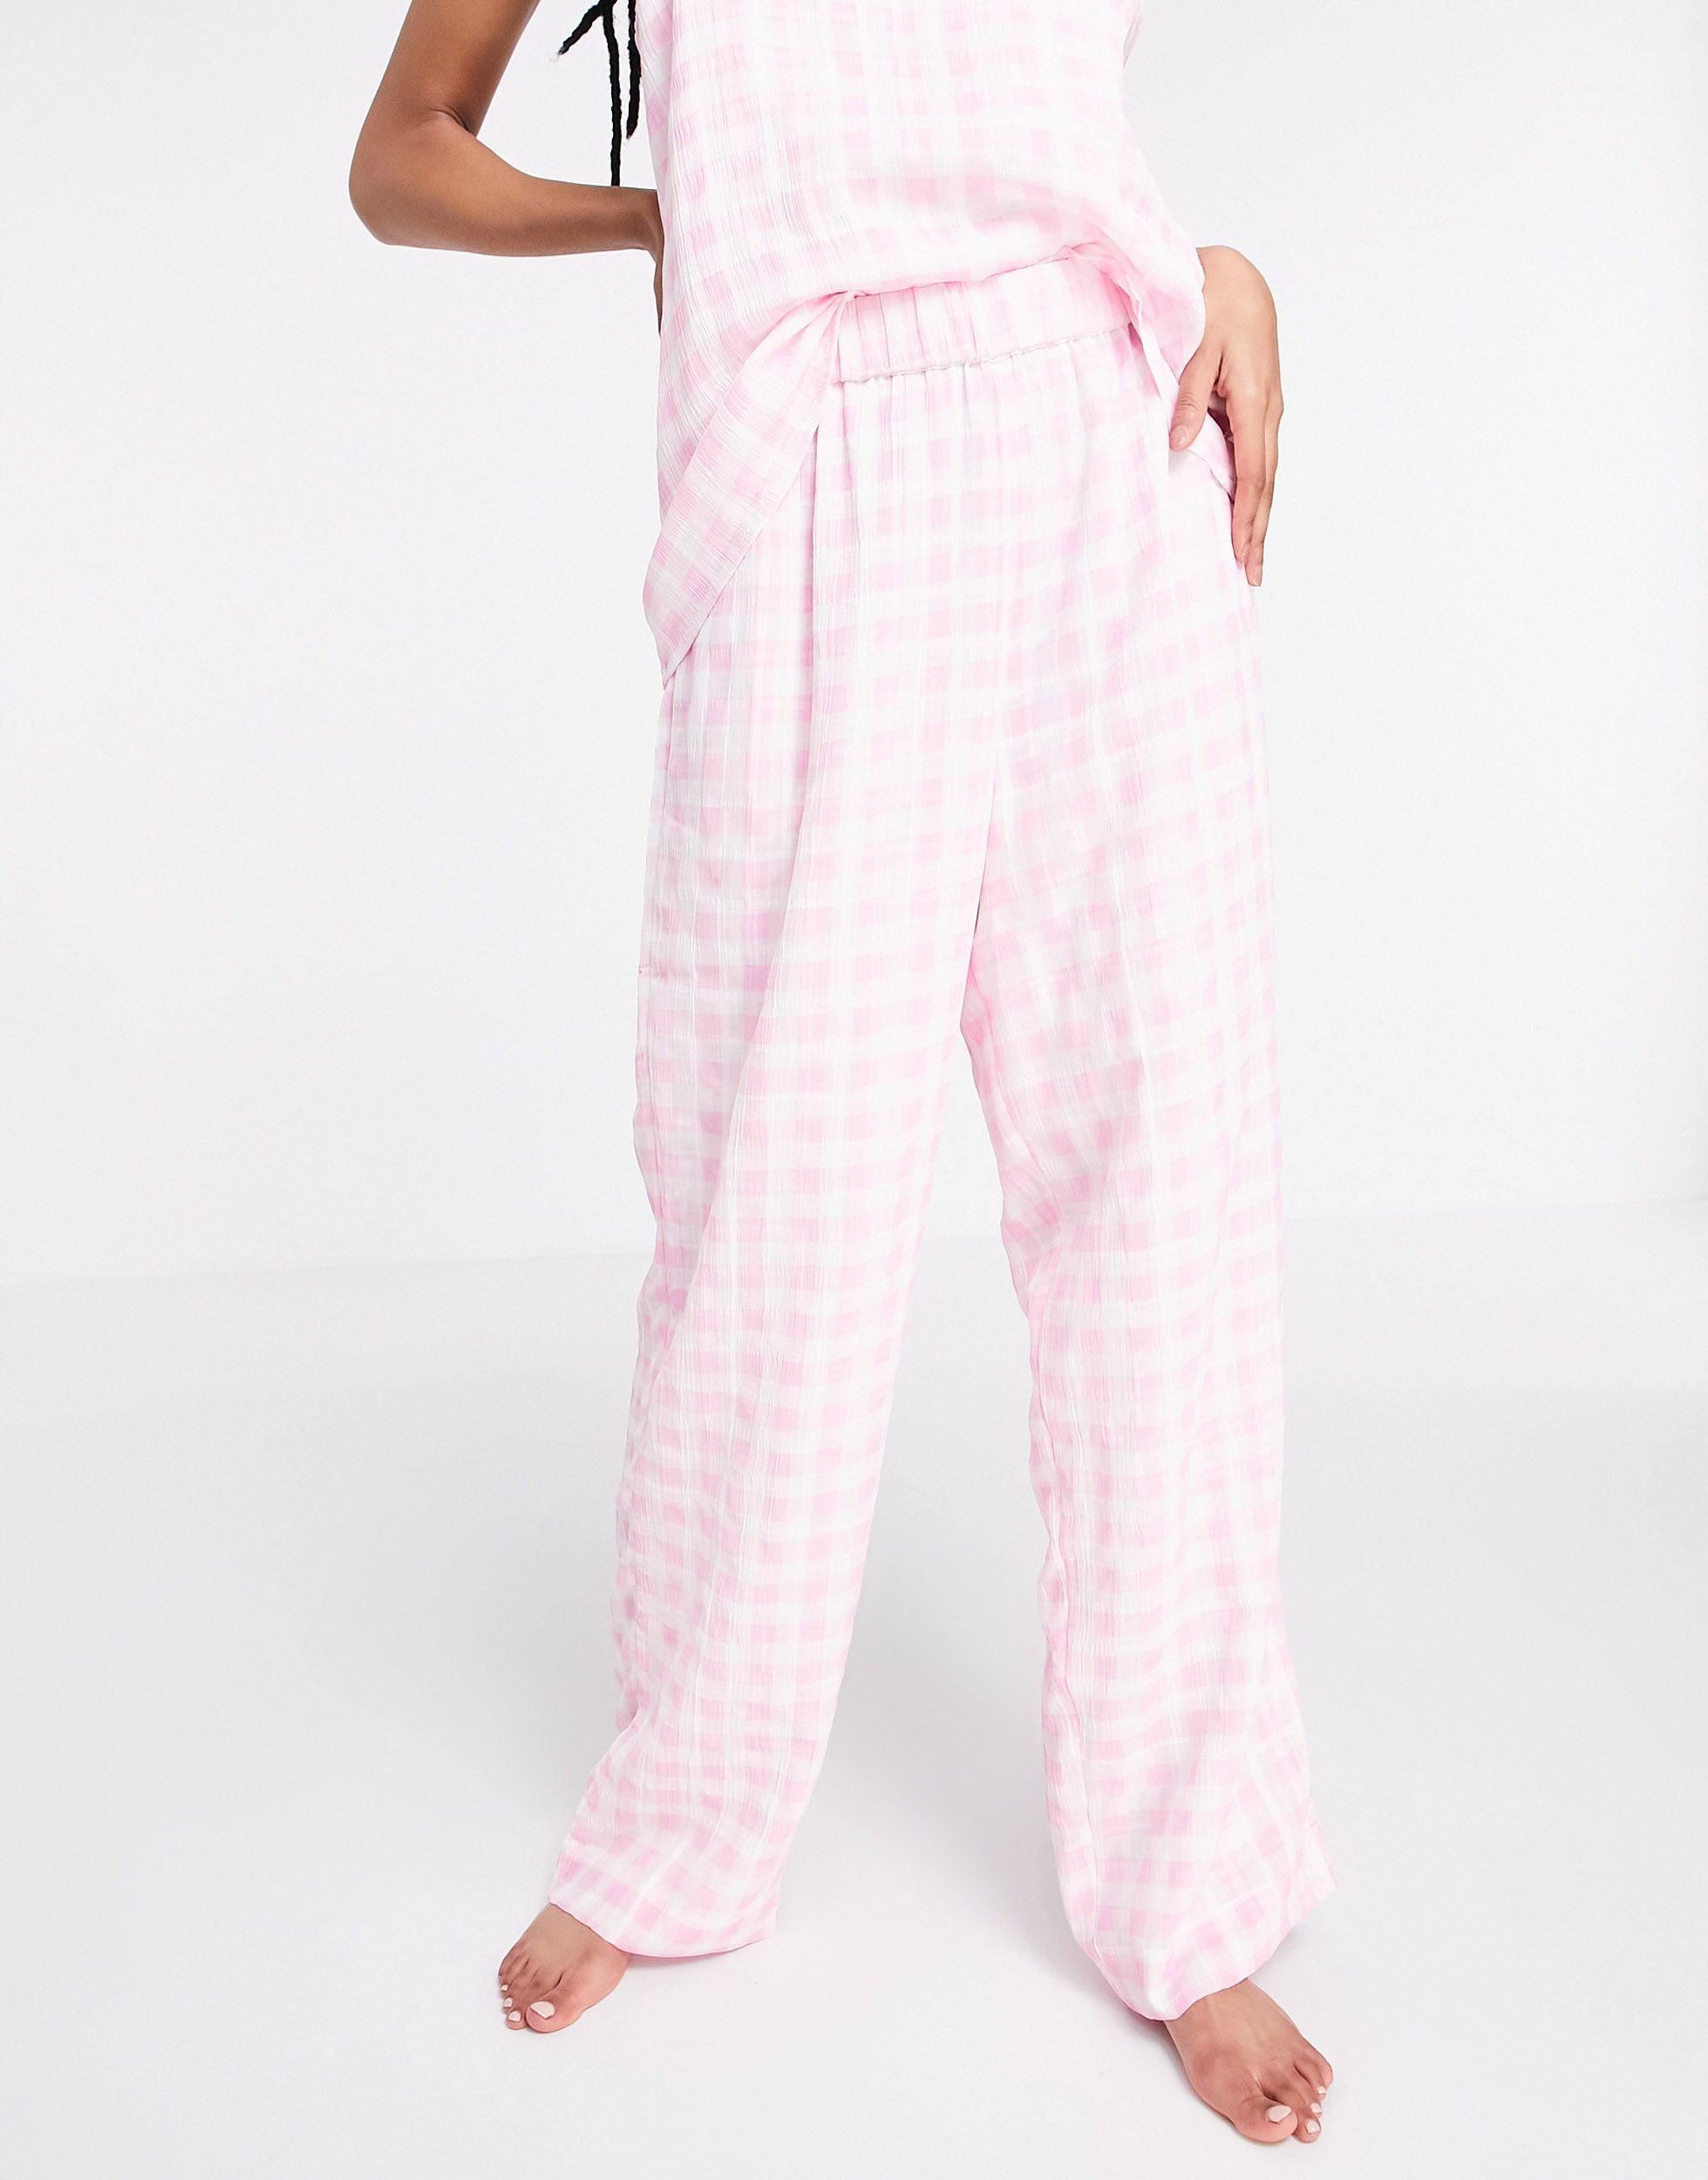 River Island Gingham Check Pyjama Cami And Trouser Set in Pink | Lyst